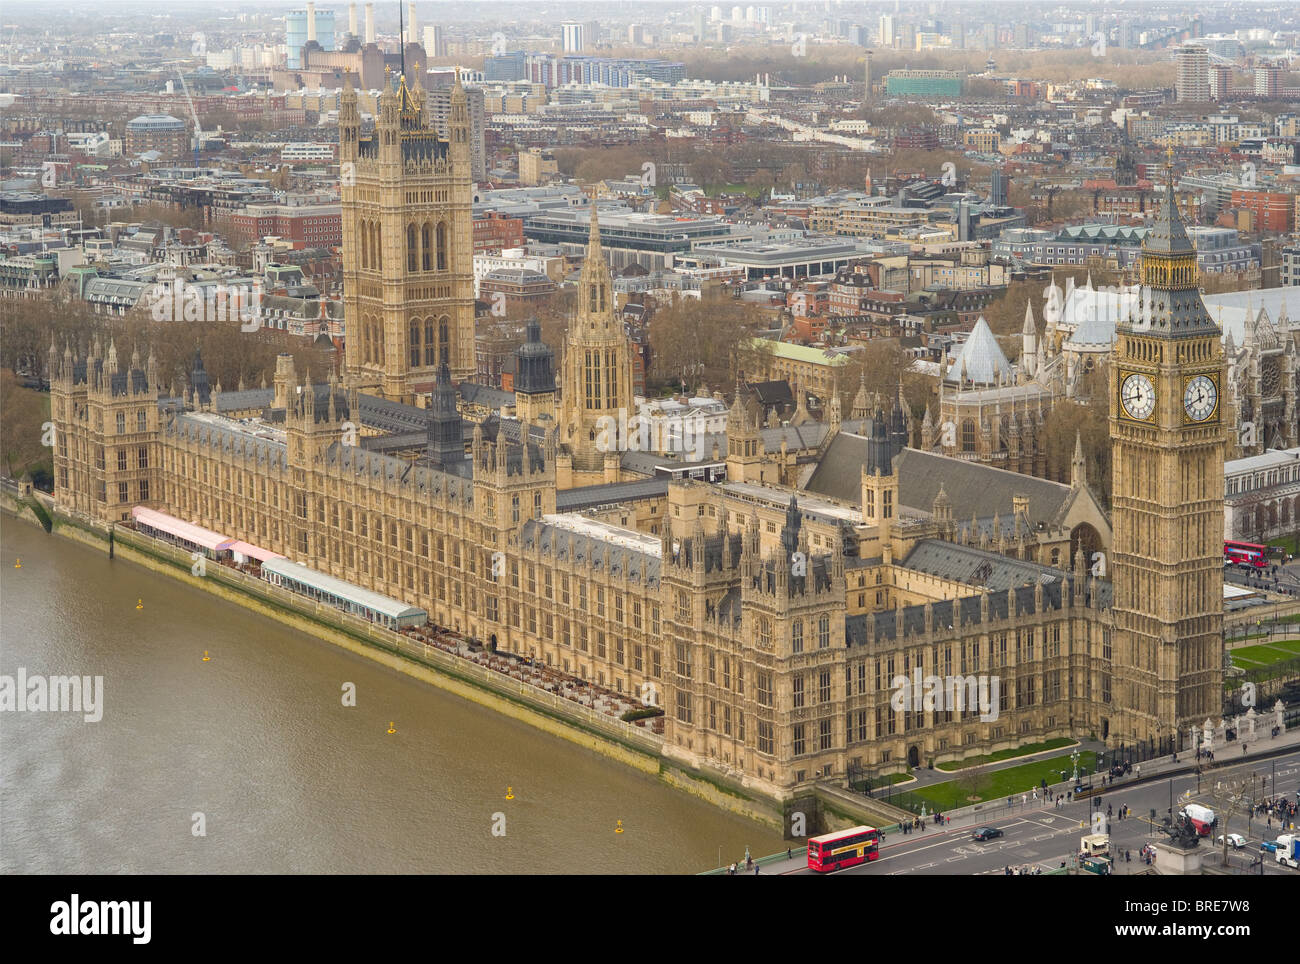 A birds eye view over the Thames of the Palace of Westminster (Houses of Parliament) and Westminster from the London Eye in London, England, UK. Stock Photo